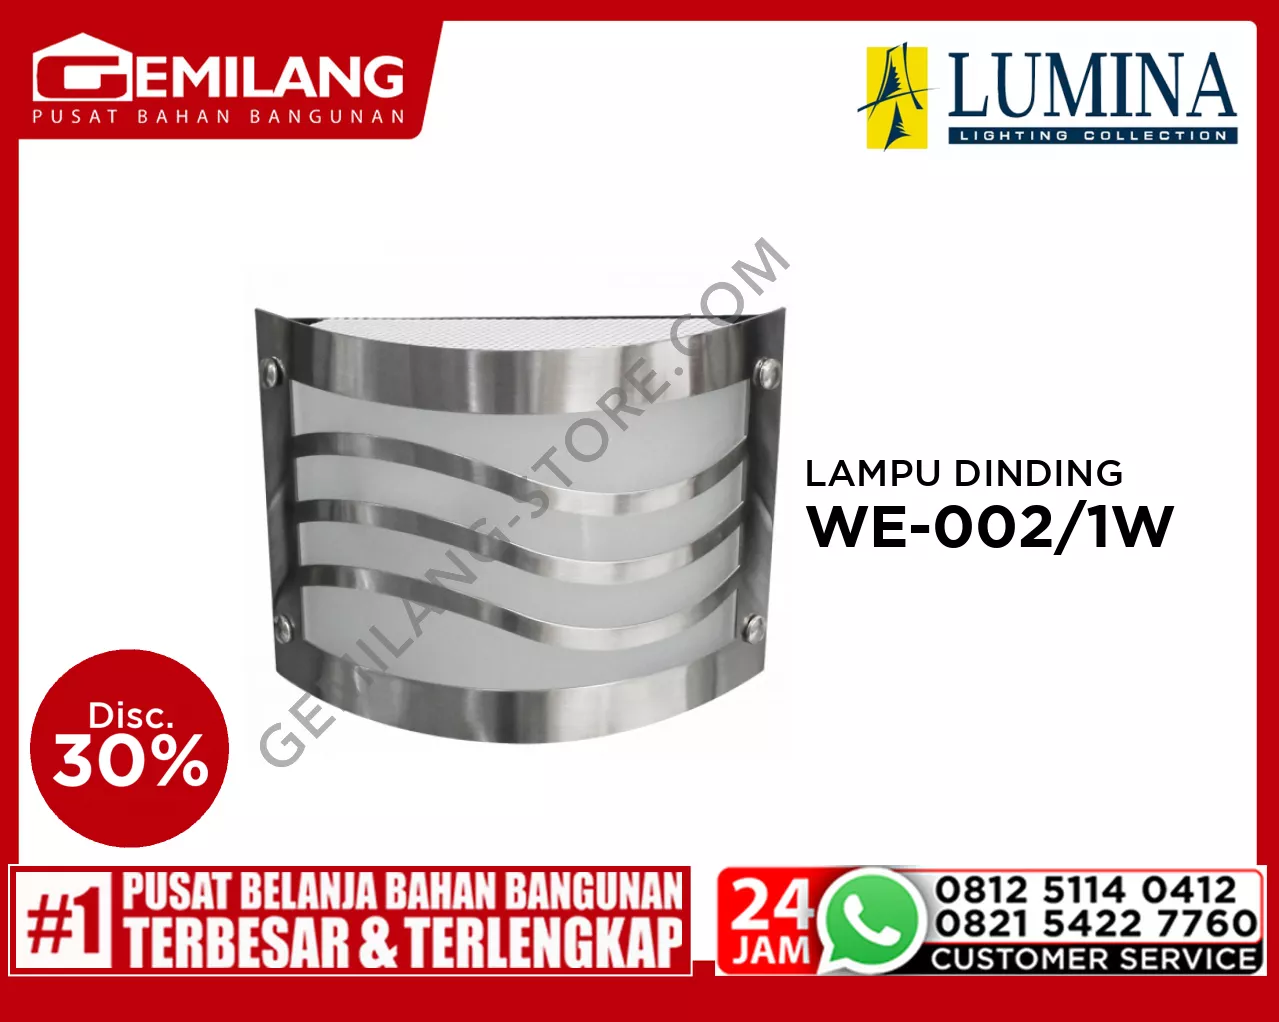 LAMPU DINDING WE-002/1W S ST